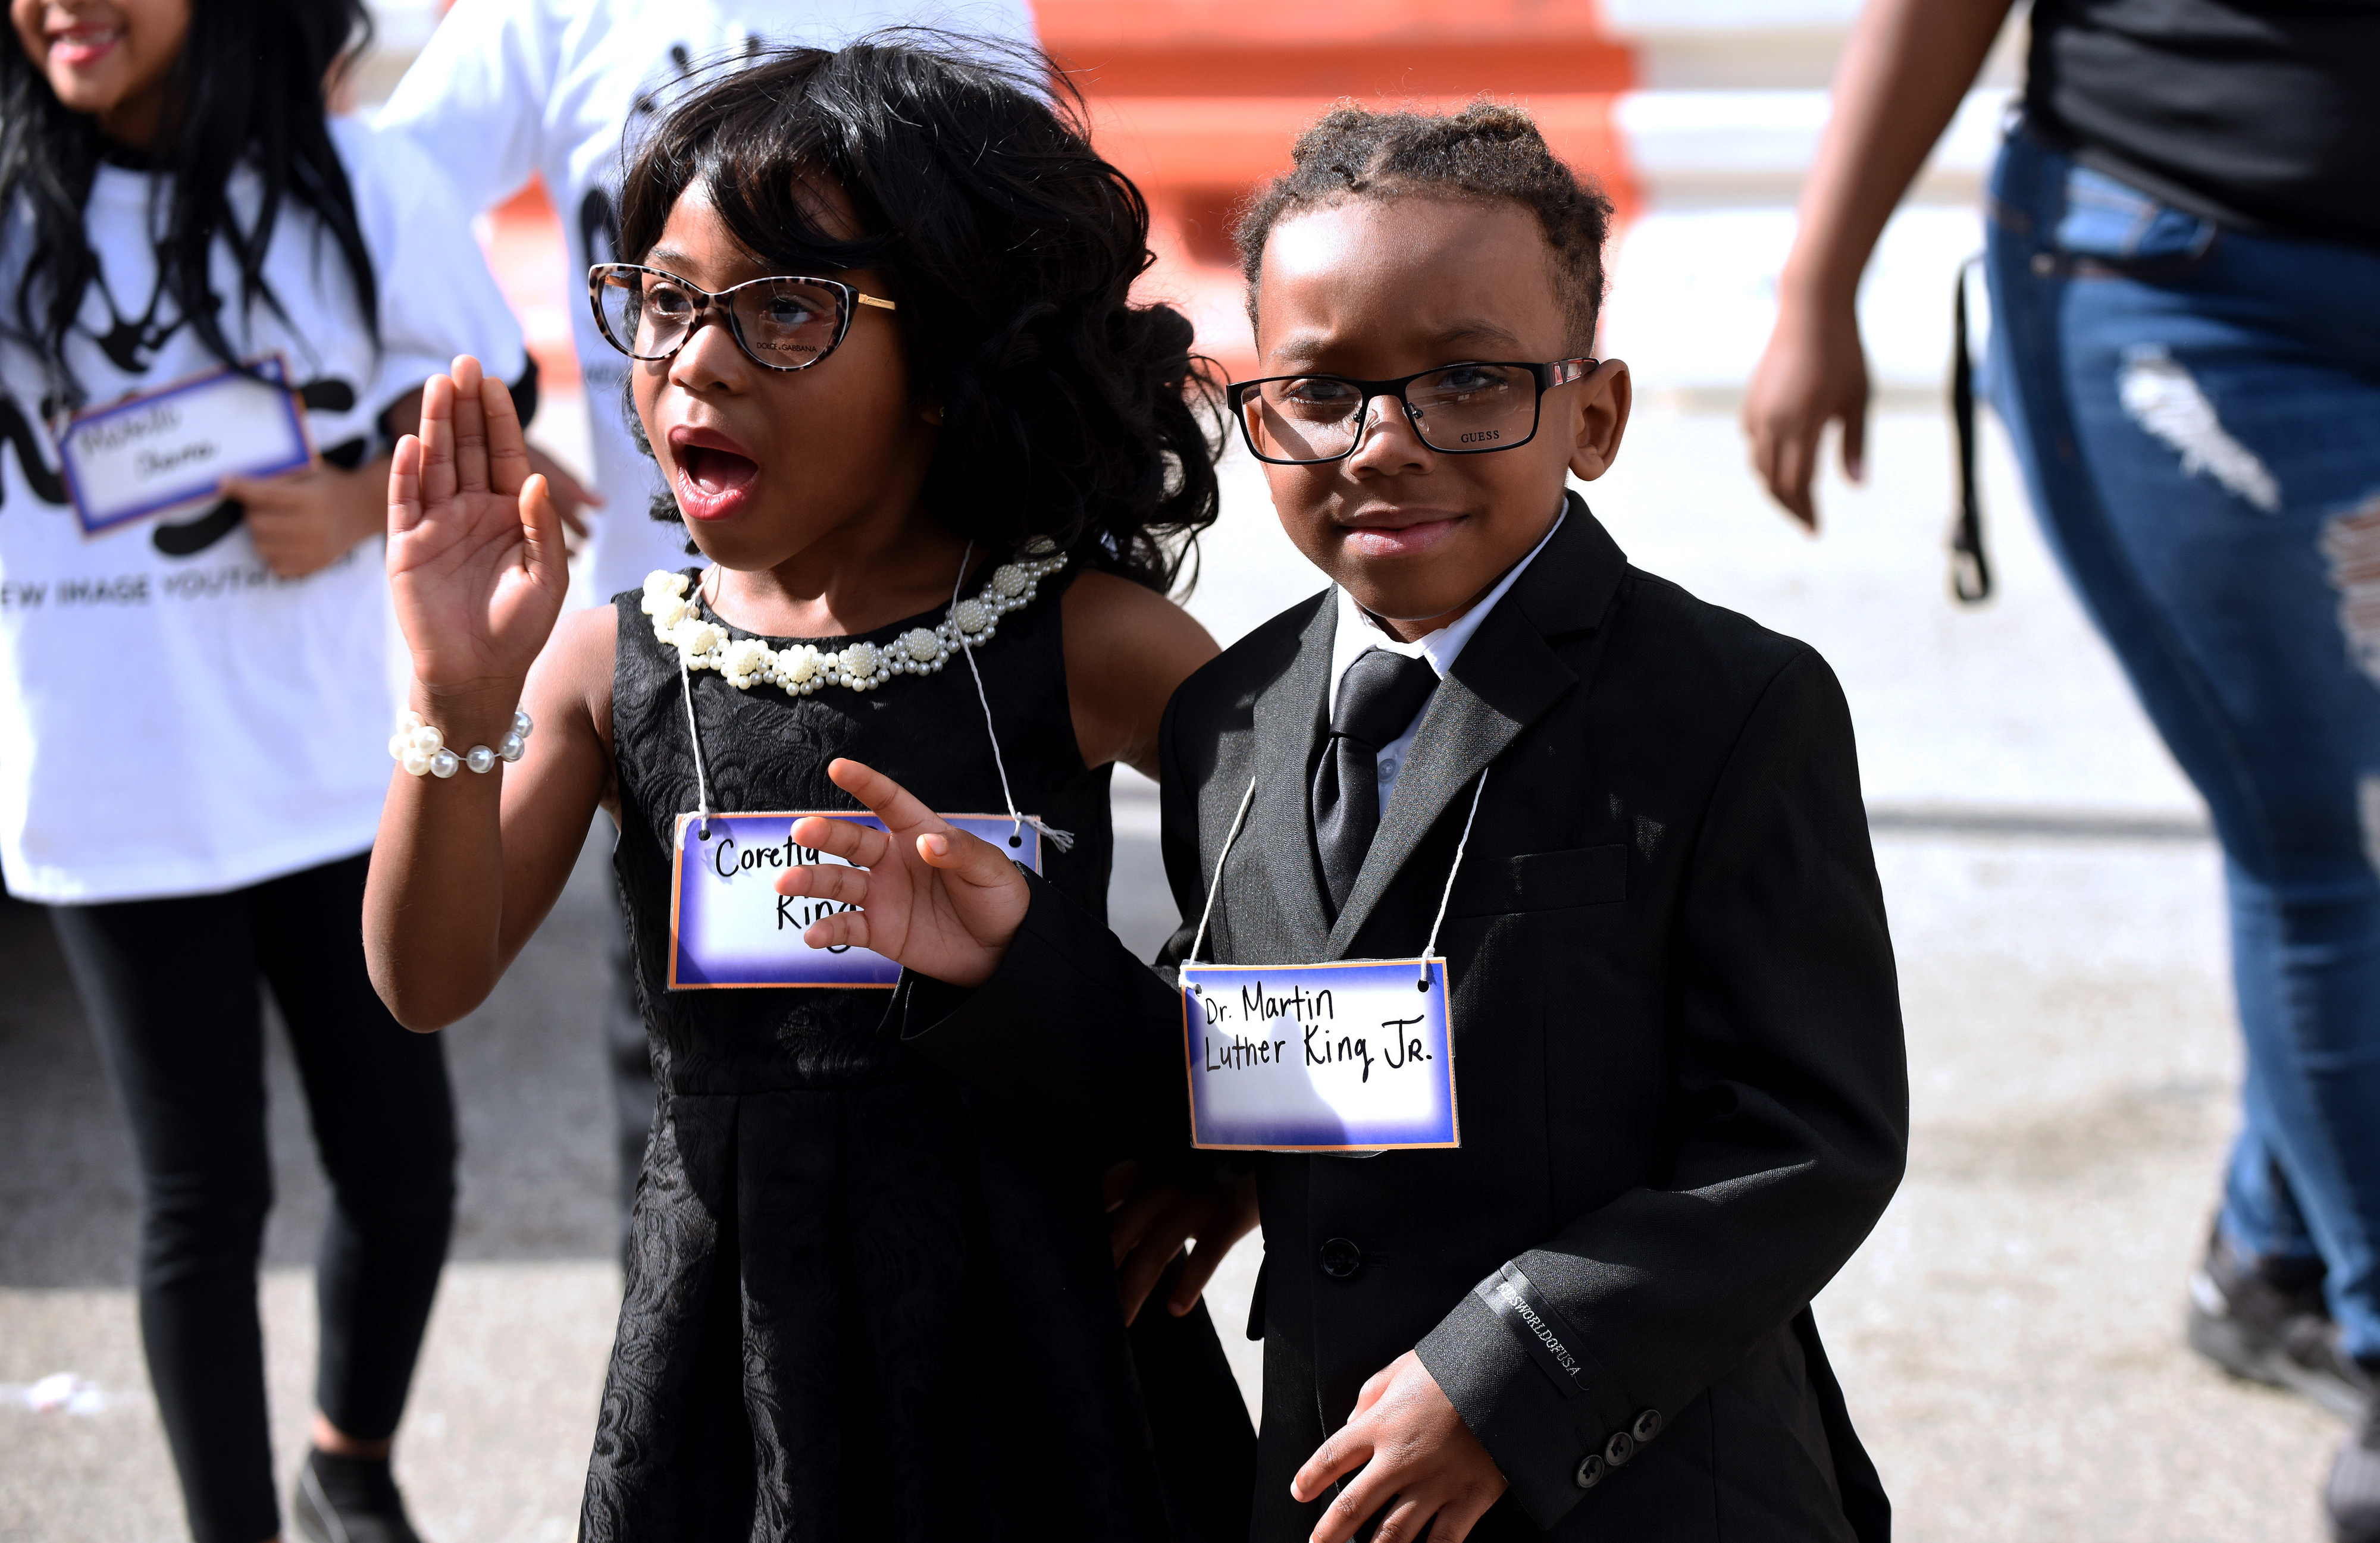 Children dressed as Dr. Martin Luther King, Jr. and Coretta Scott King